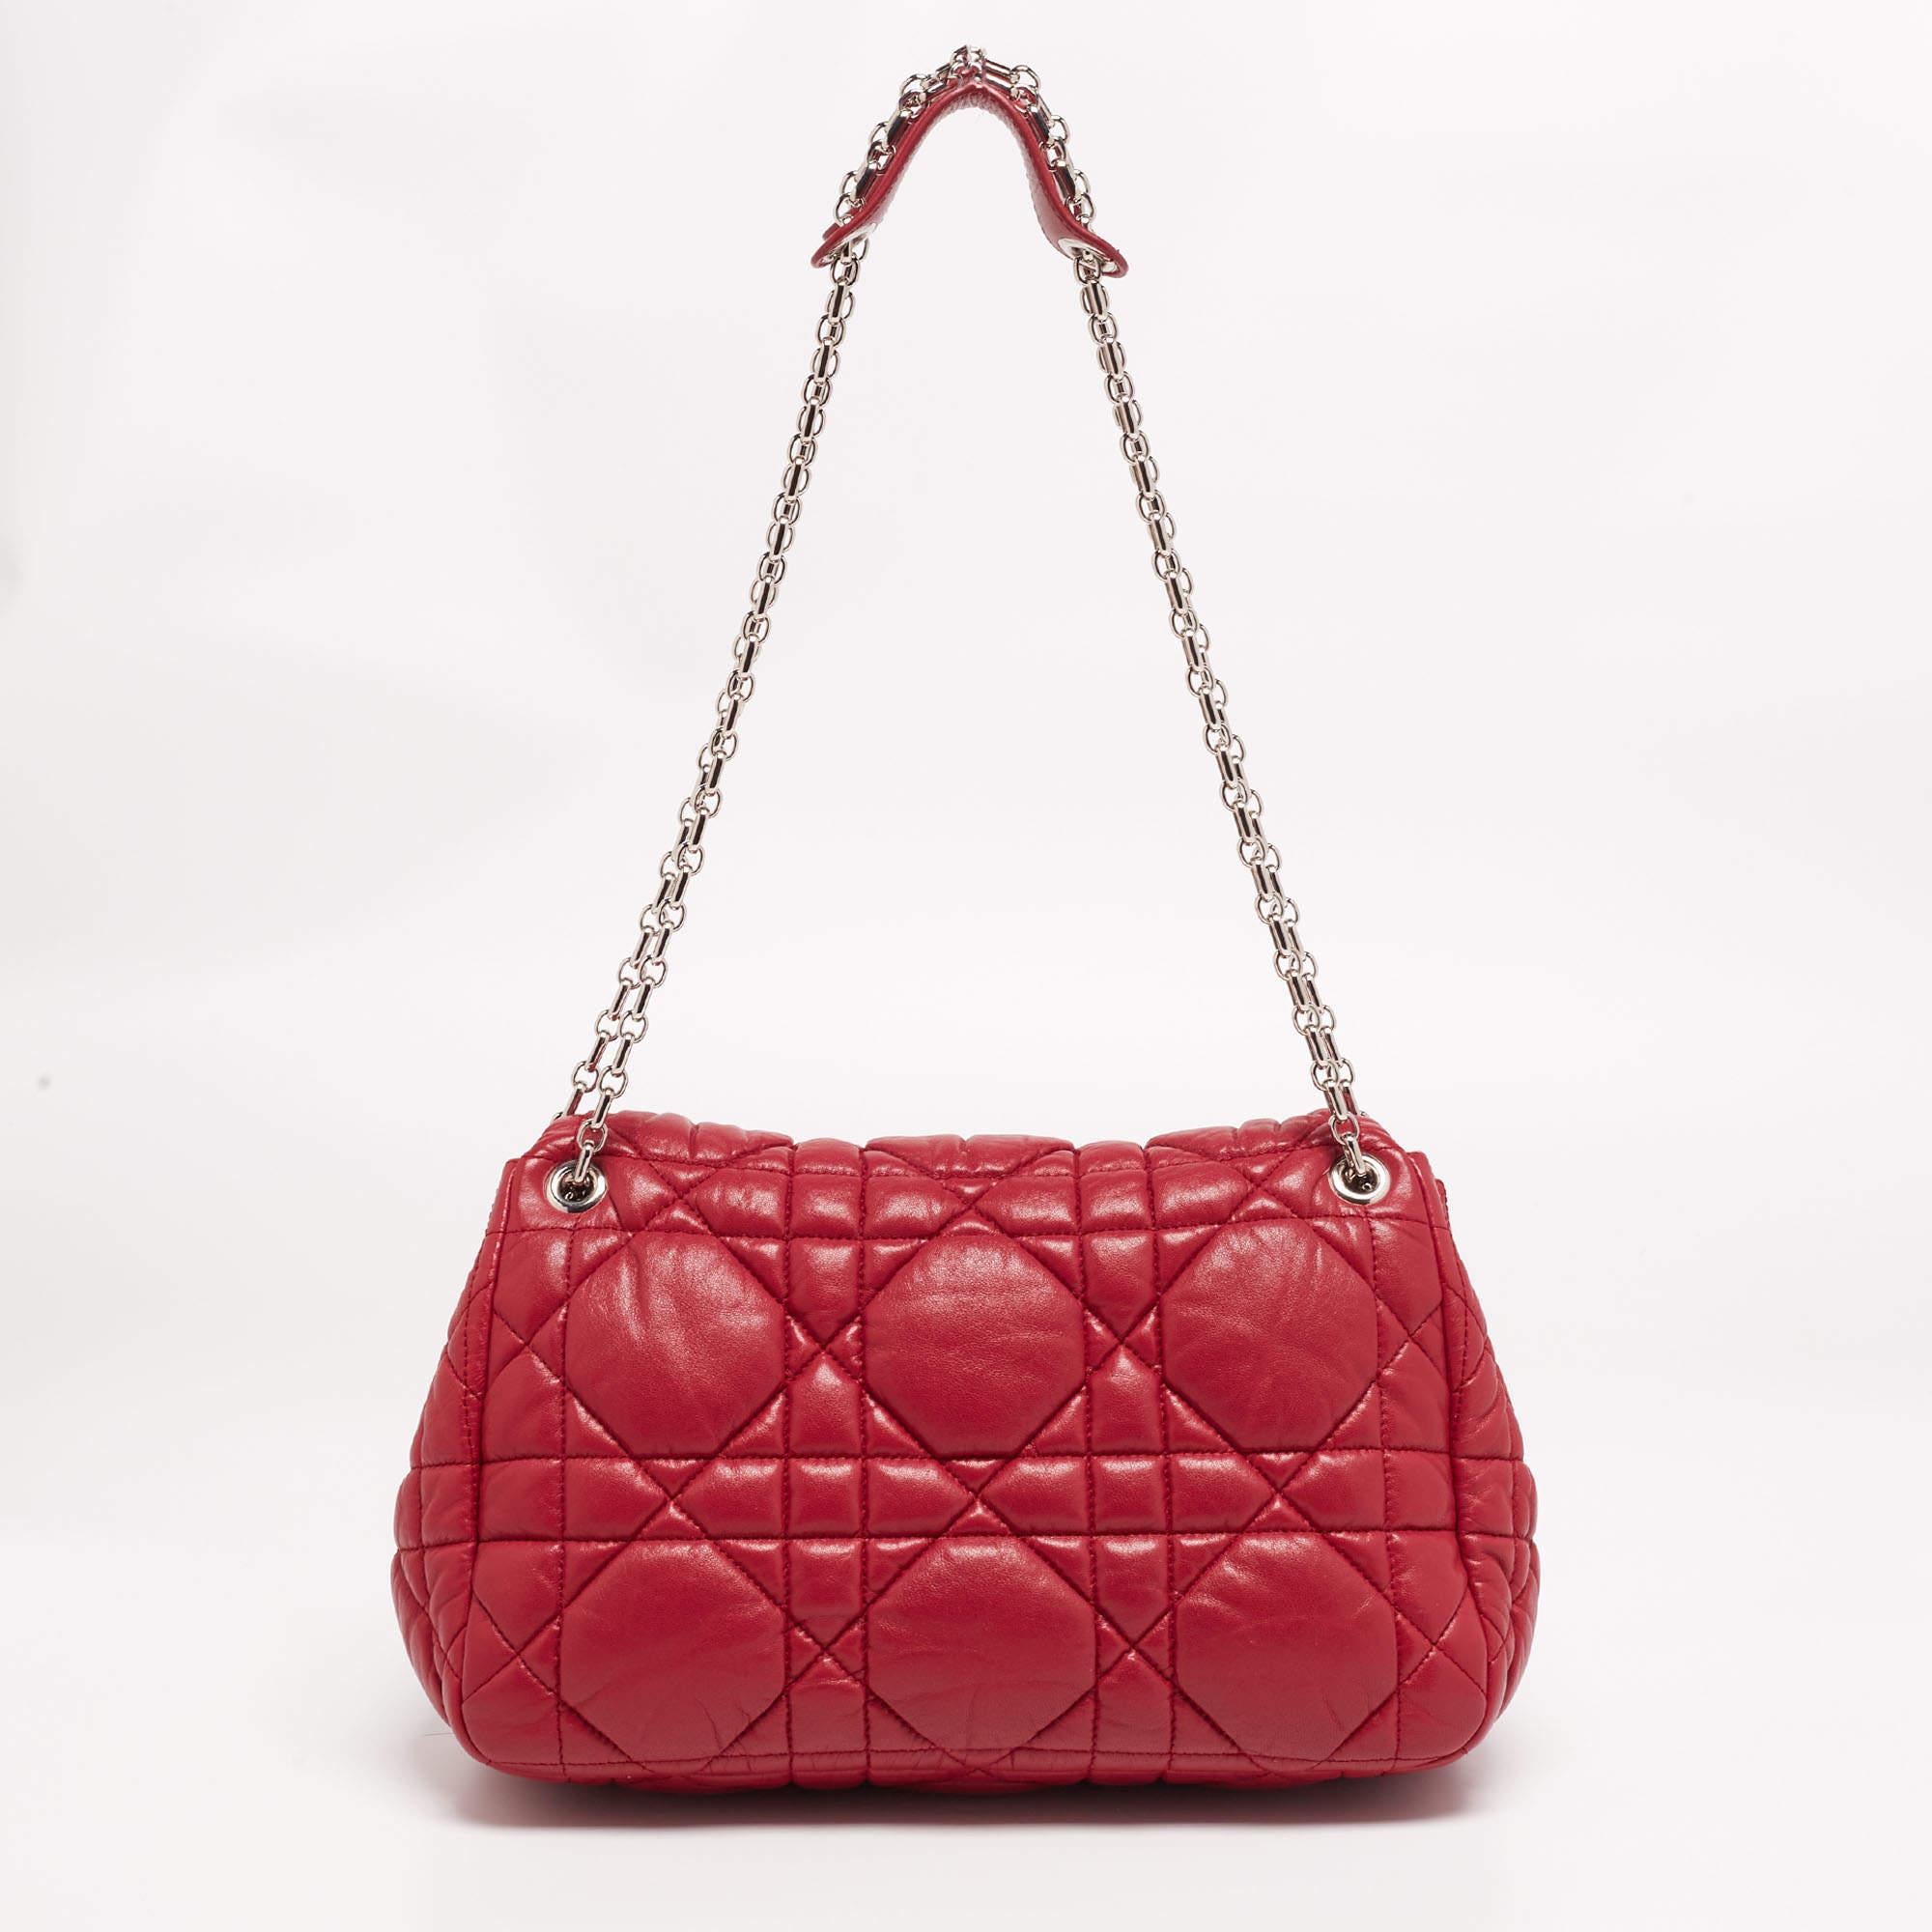 This Dior Milly La Forêt bag is made of Cannage soft leather and held by a chain-link handle. This bright red bag has a turn-lock that opens to reveal a spacious satin-lined interior and a zip compartment.

Includes: Original Dustbag, Authenticity